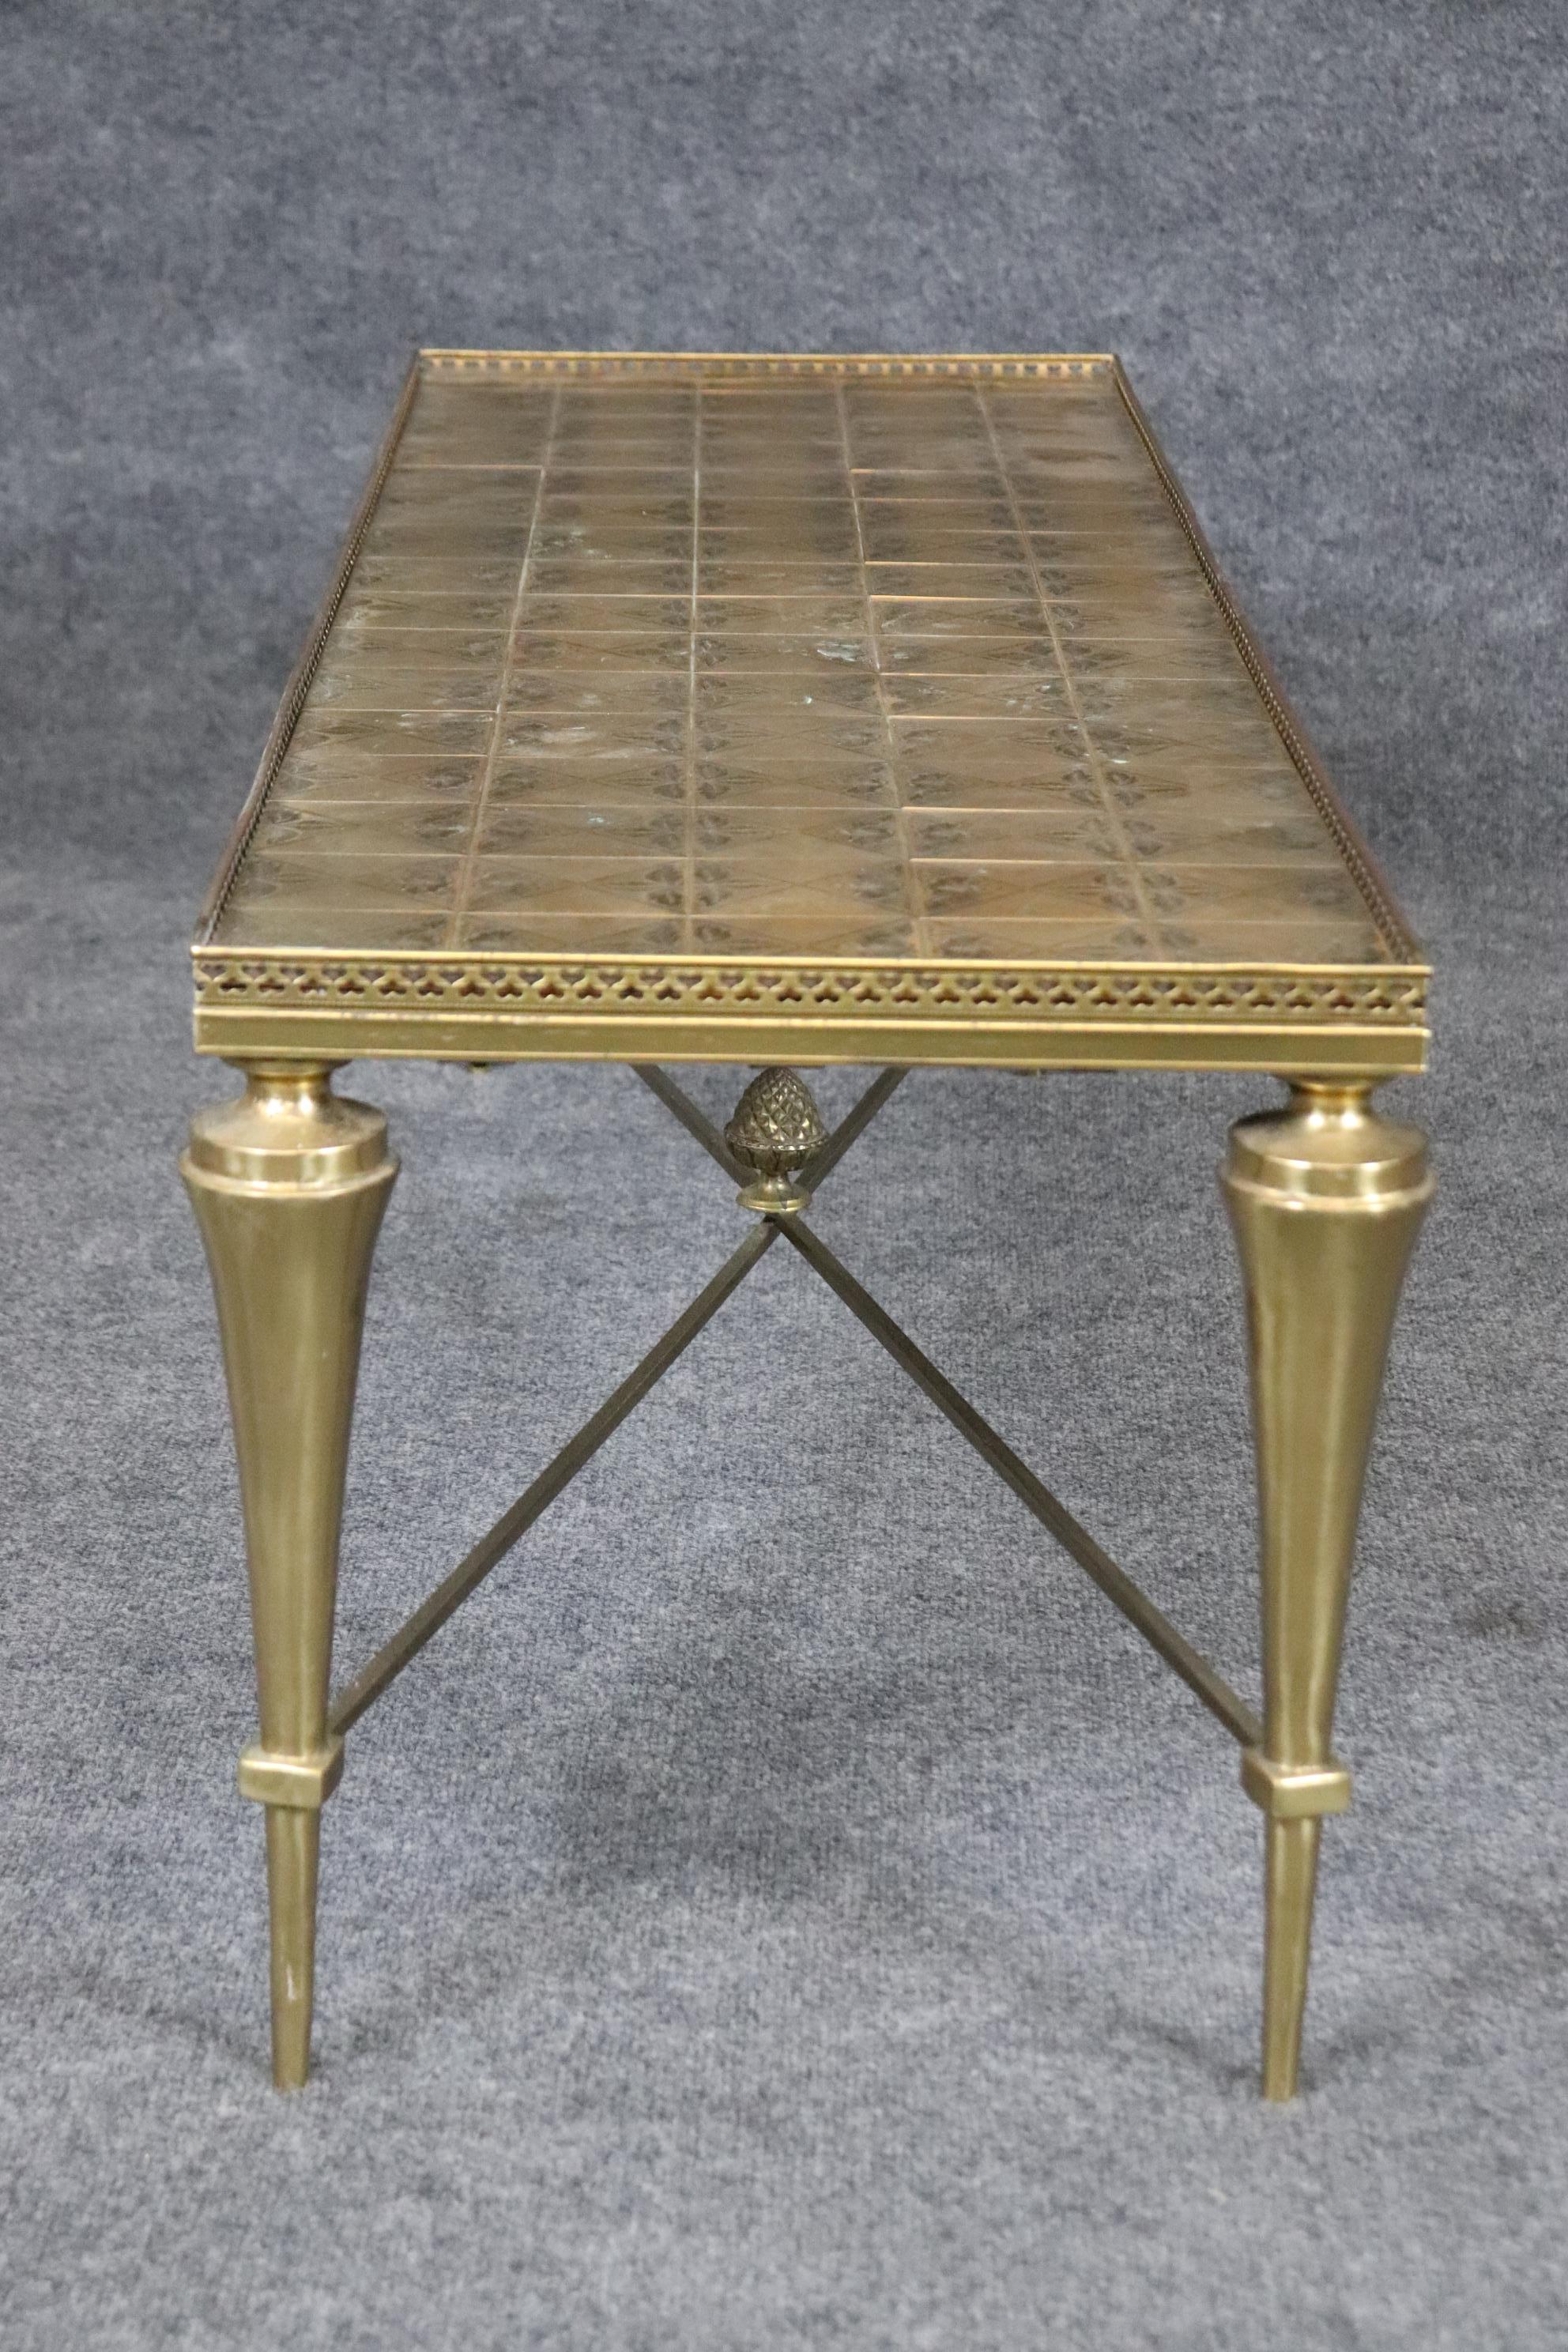 This is a Maison Jansen attributed coffee table of fine design and form made of brass in the Directoire manner. The table is in good condition and features robust conical legs and a cross stretcher with a pineapple finial and a floral designed top.